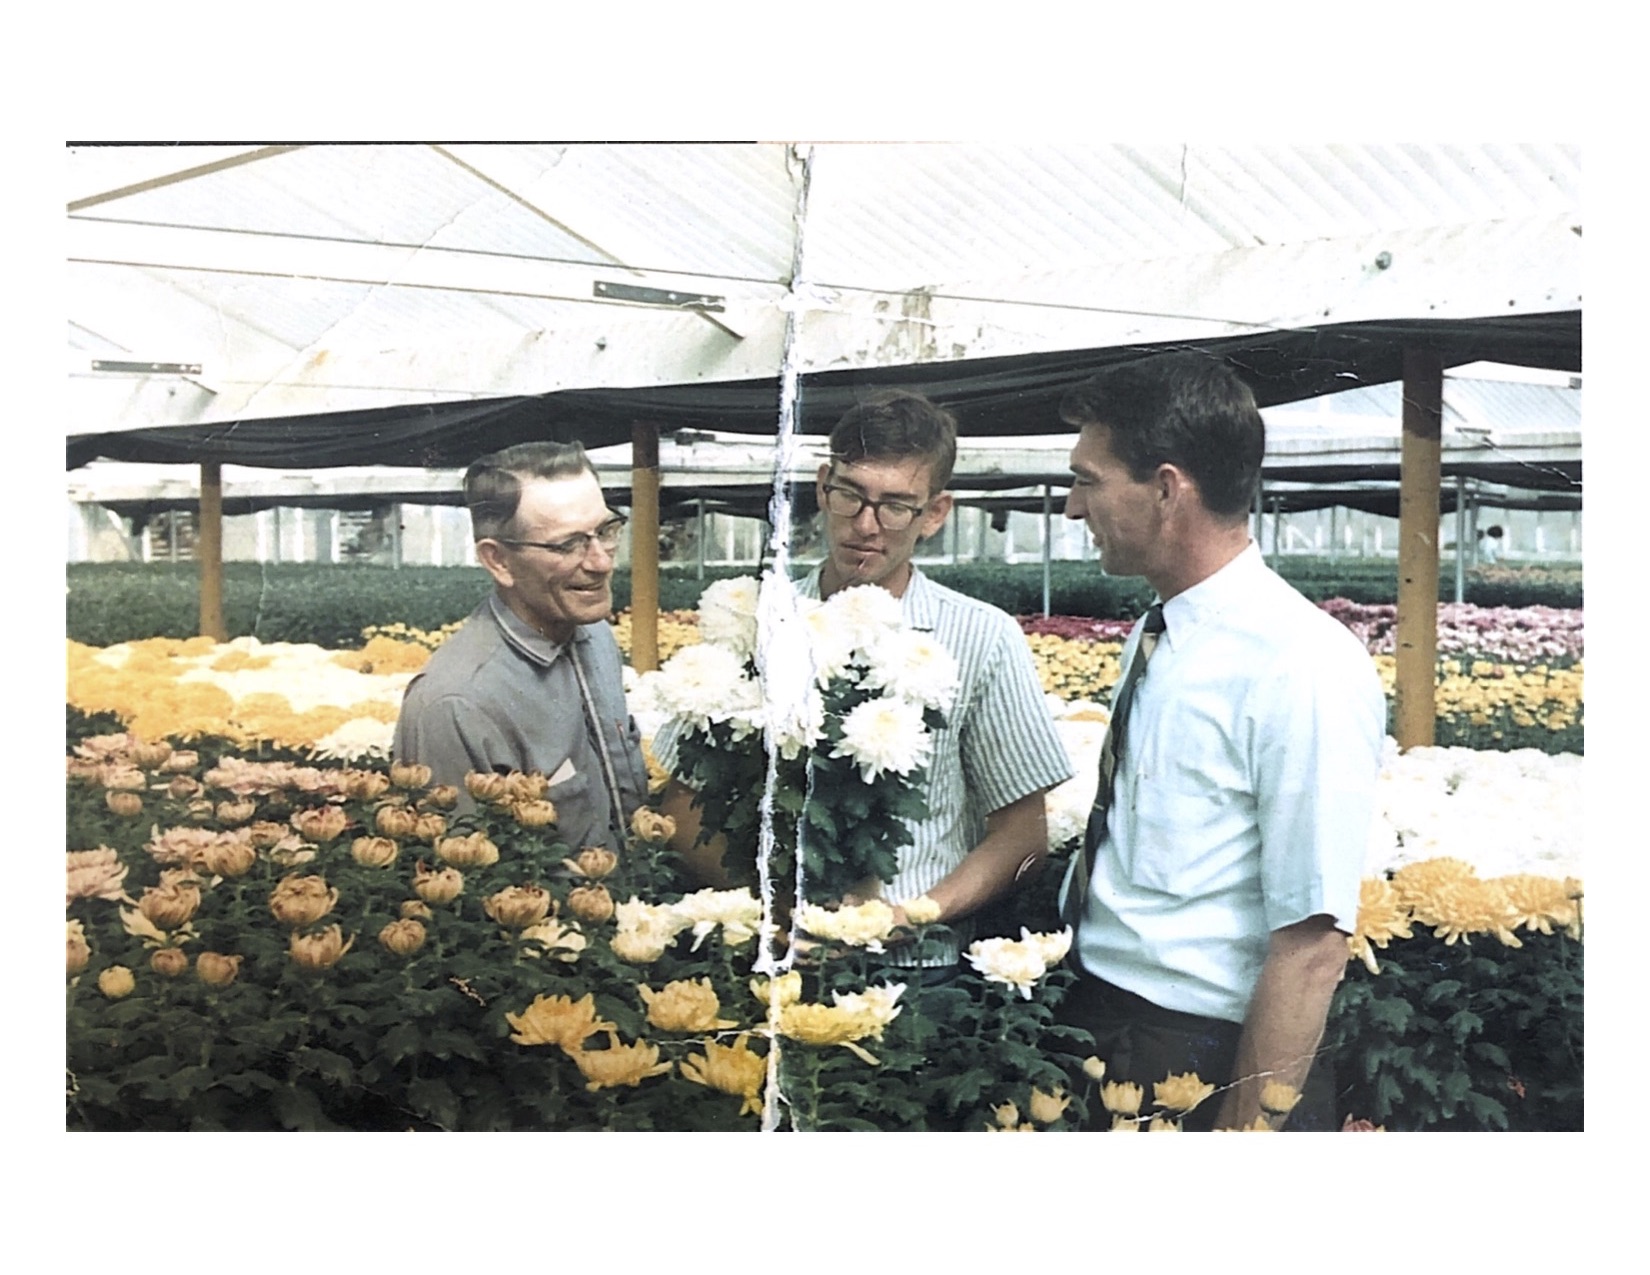 boys in greenhouse with mums.jpg